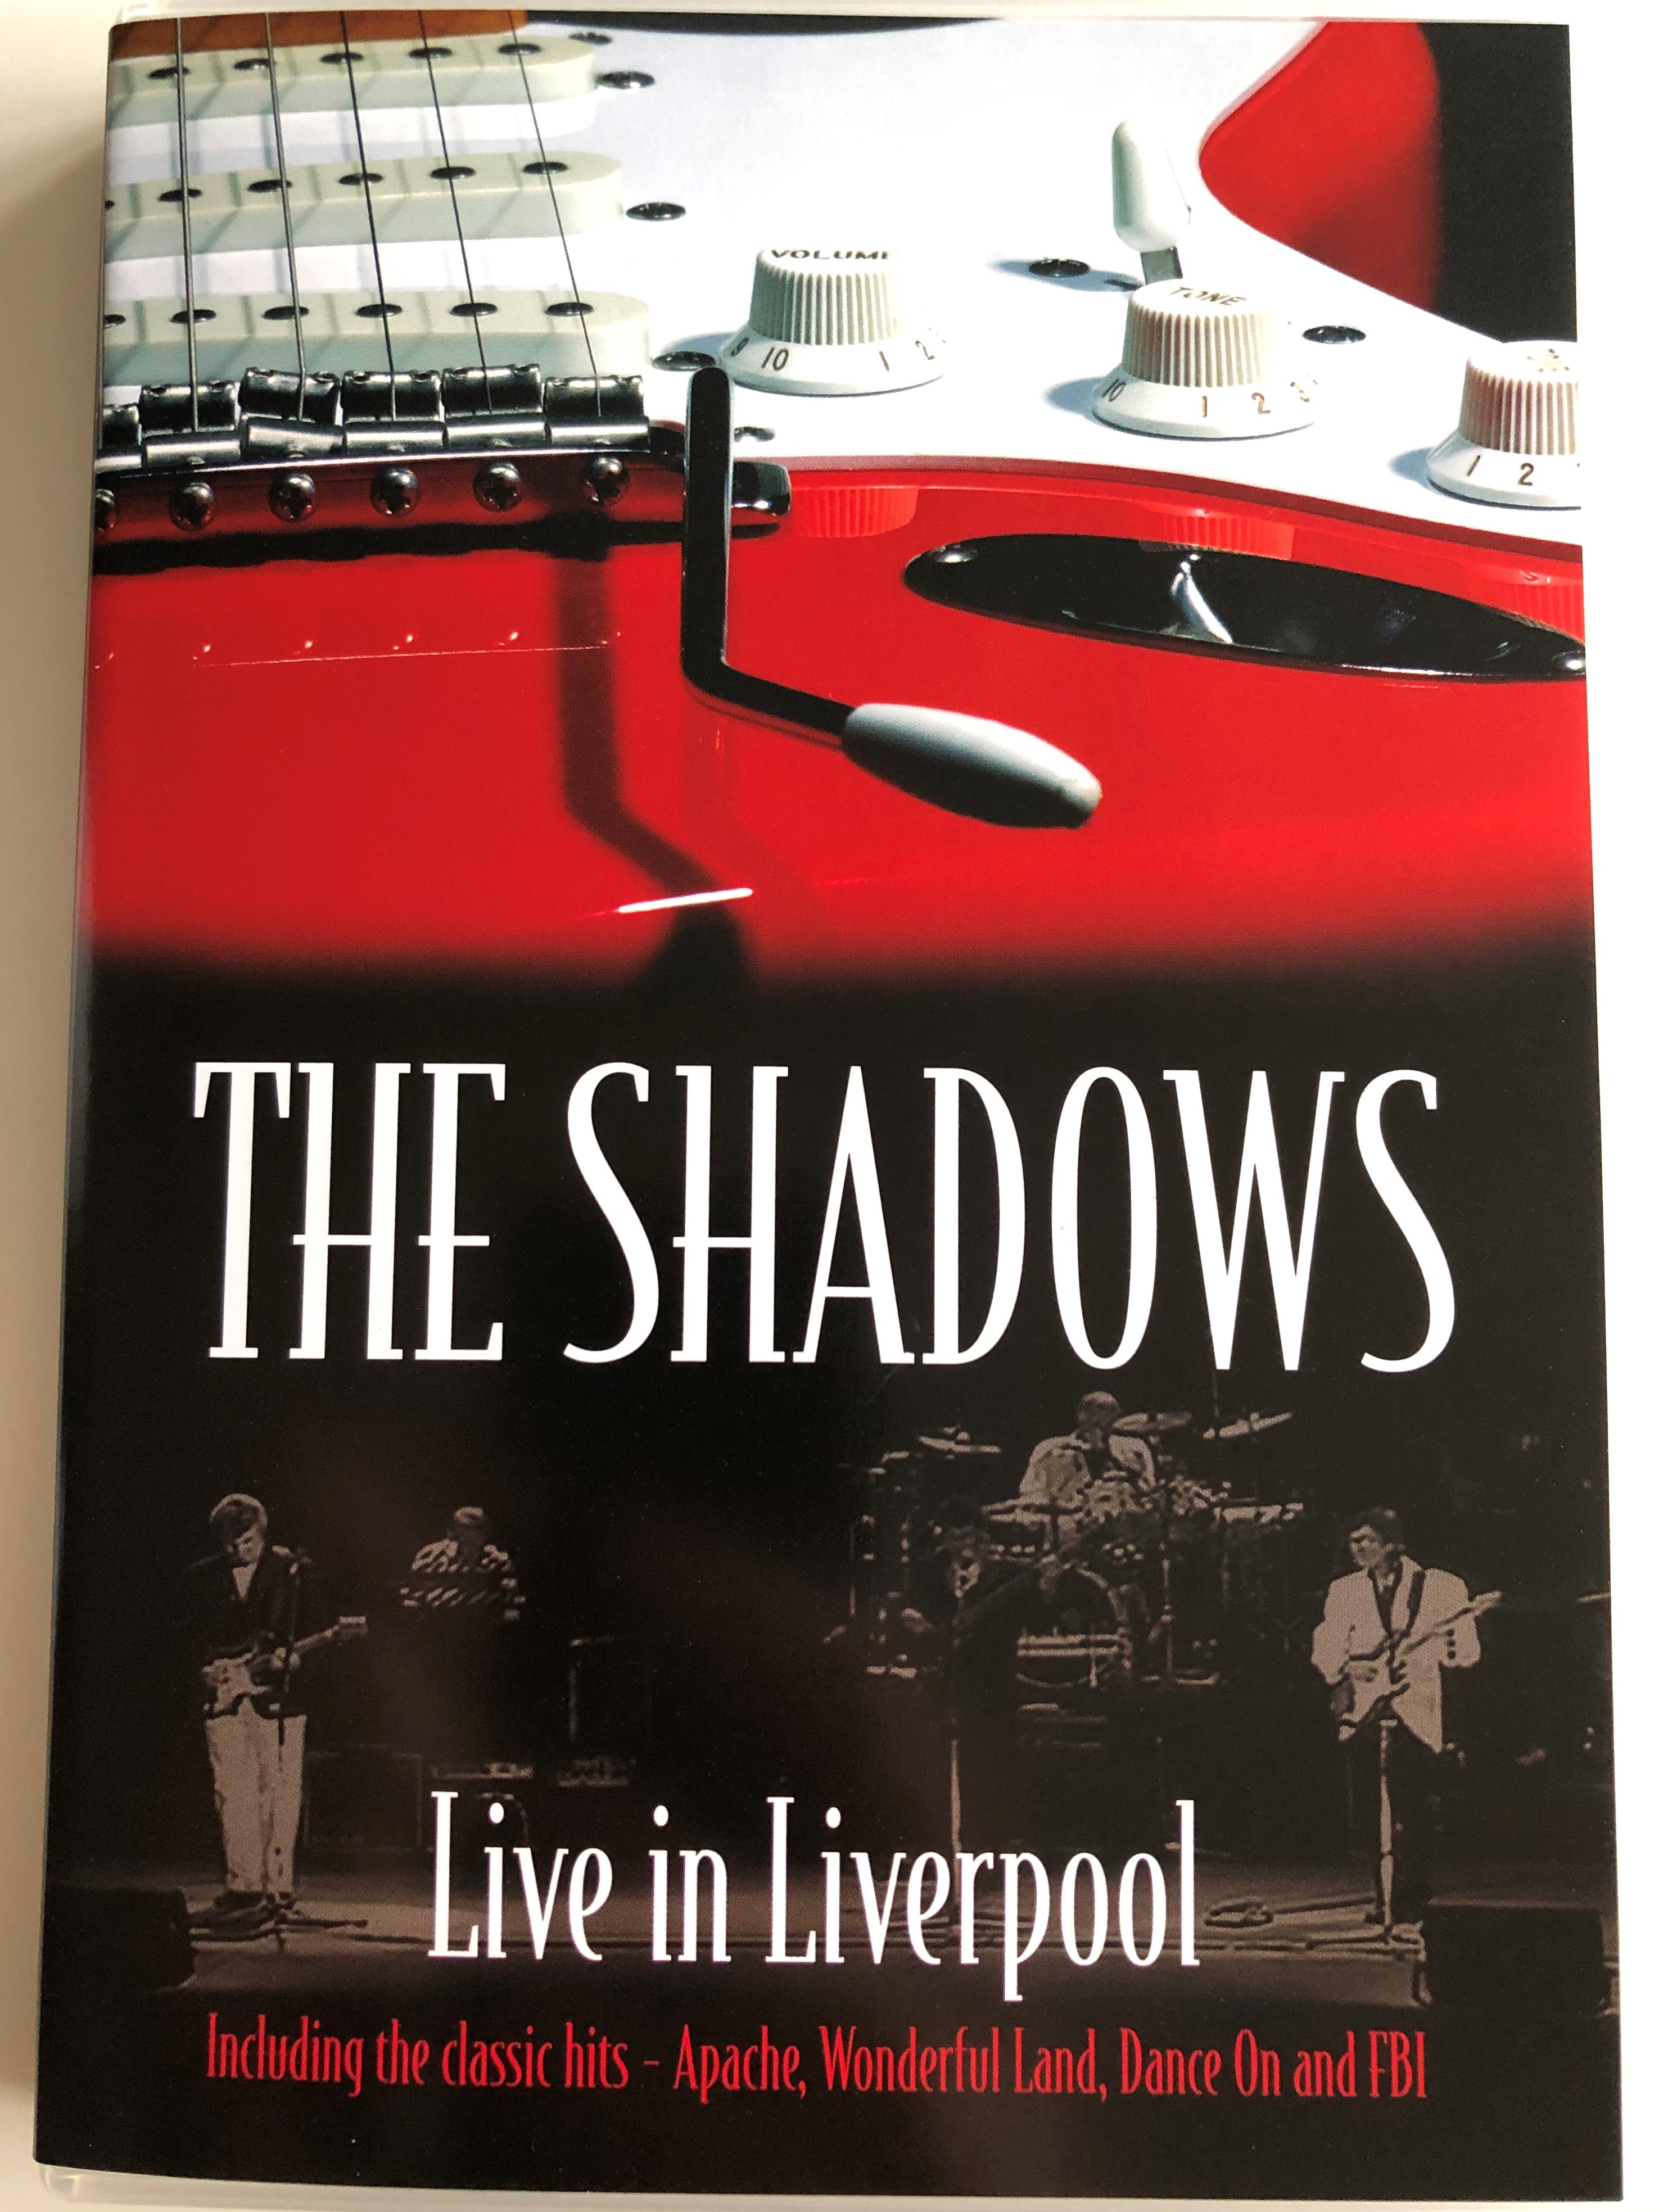 the-shadows-live-in-liverpool-dvd-2005-including-the-classic-hits-apache-wonderful-land-dance-on-and-fbi-1.jpg